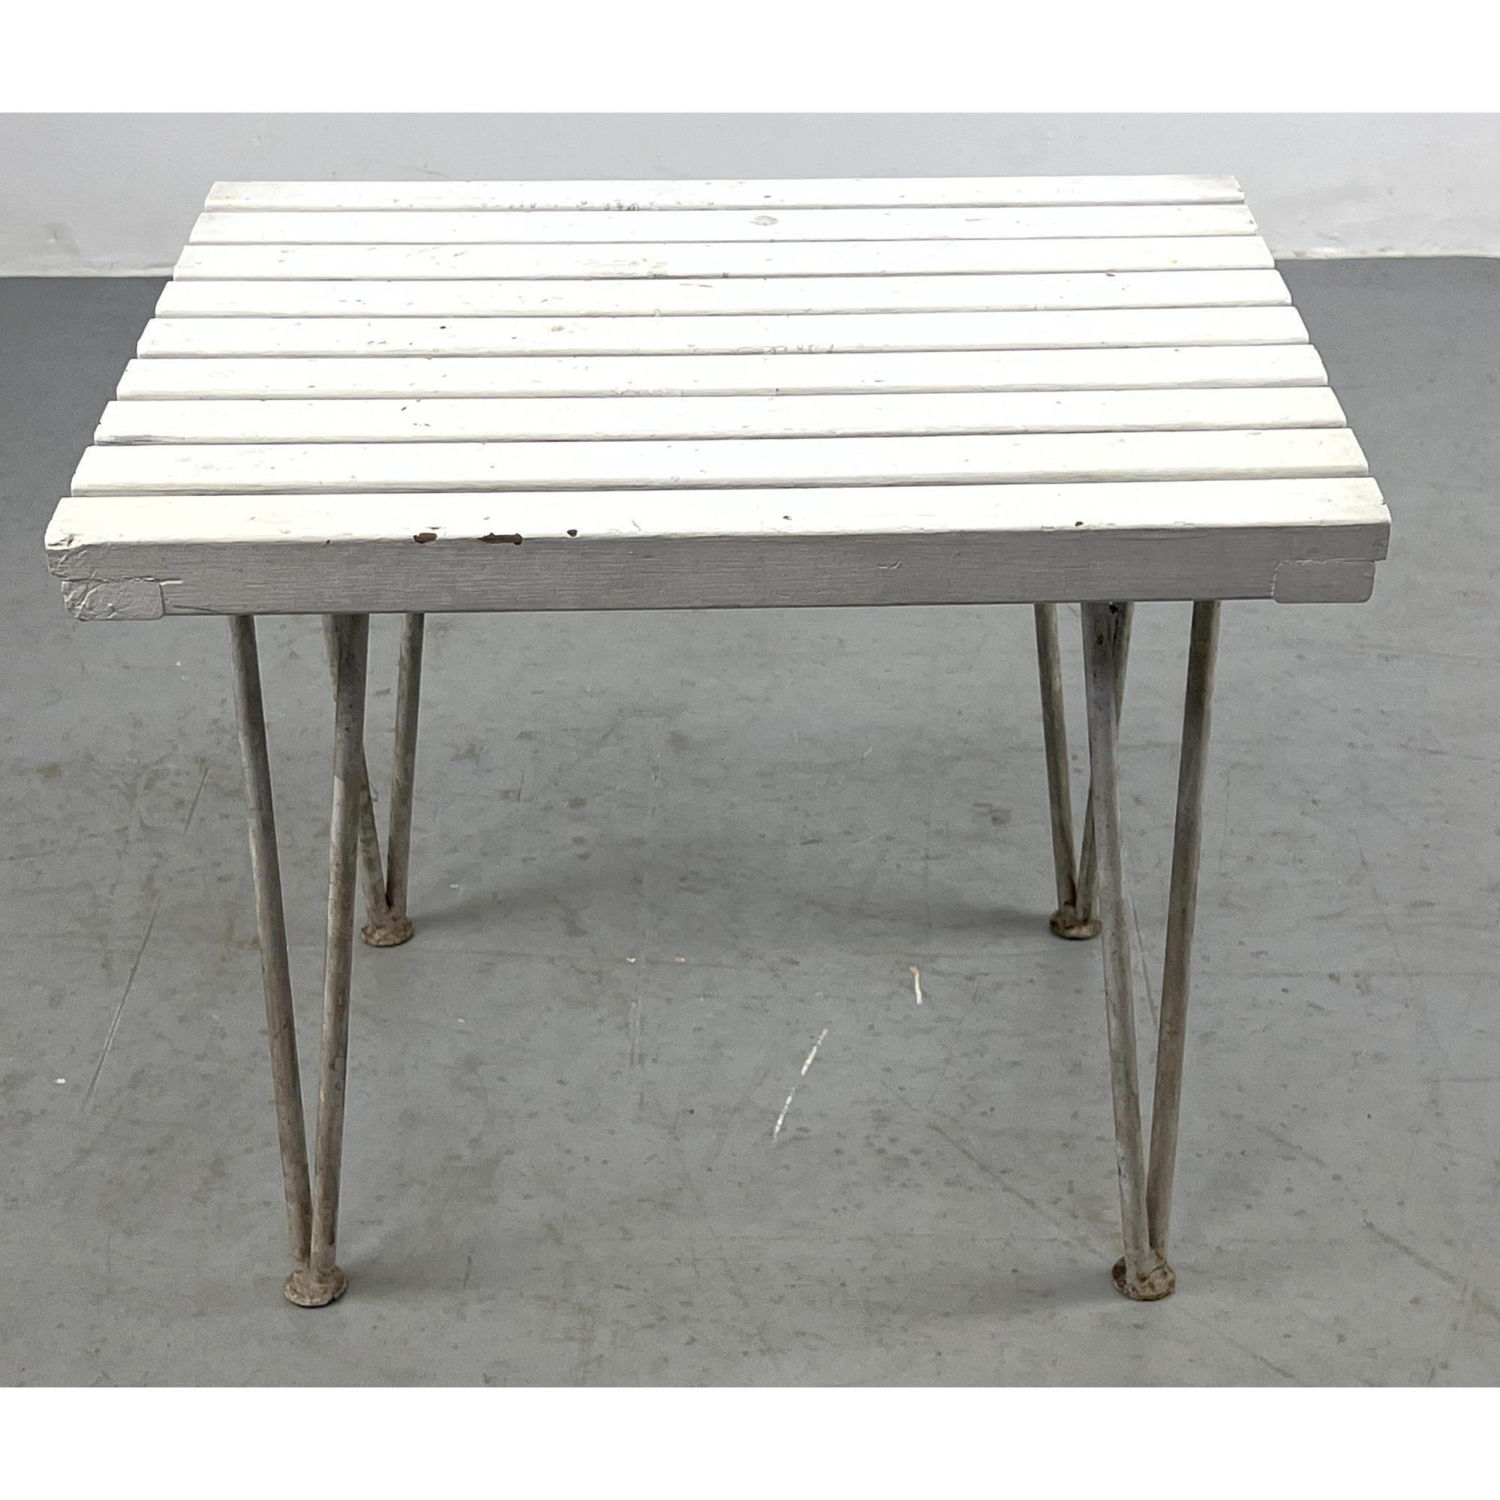 Painted White Slat Top Table Painted 2ff3f6